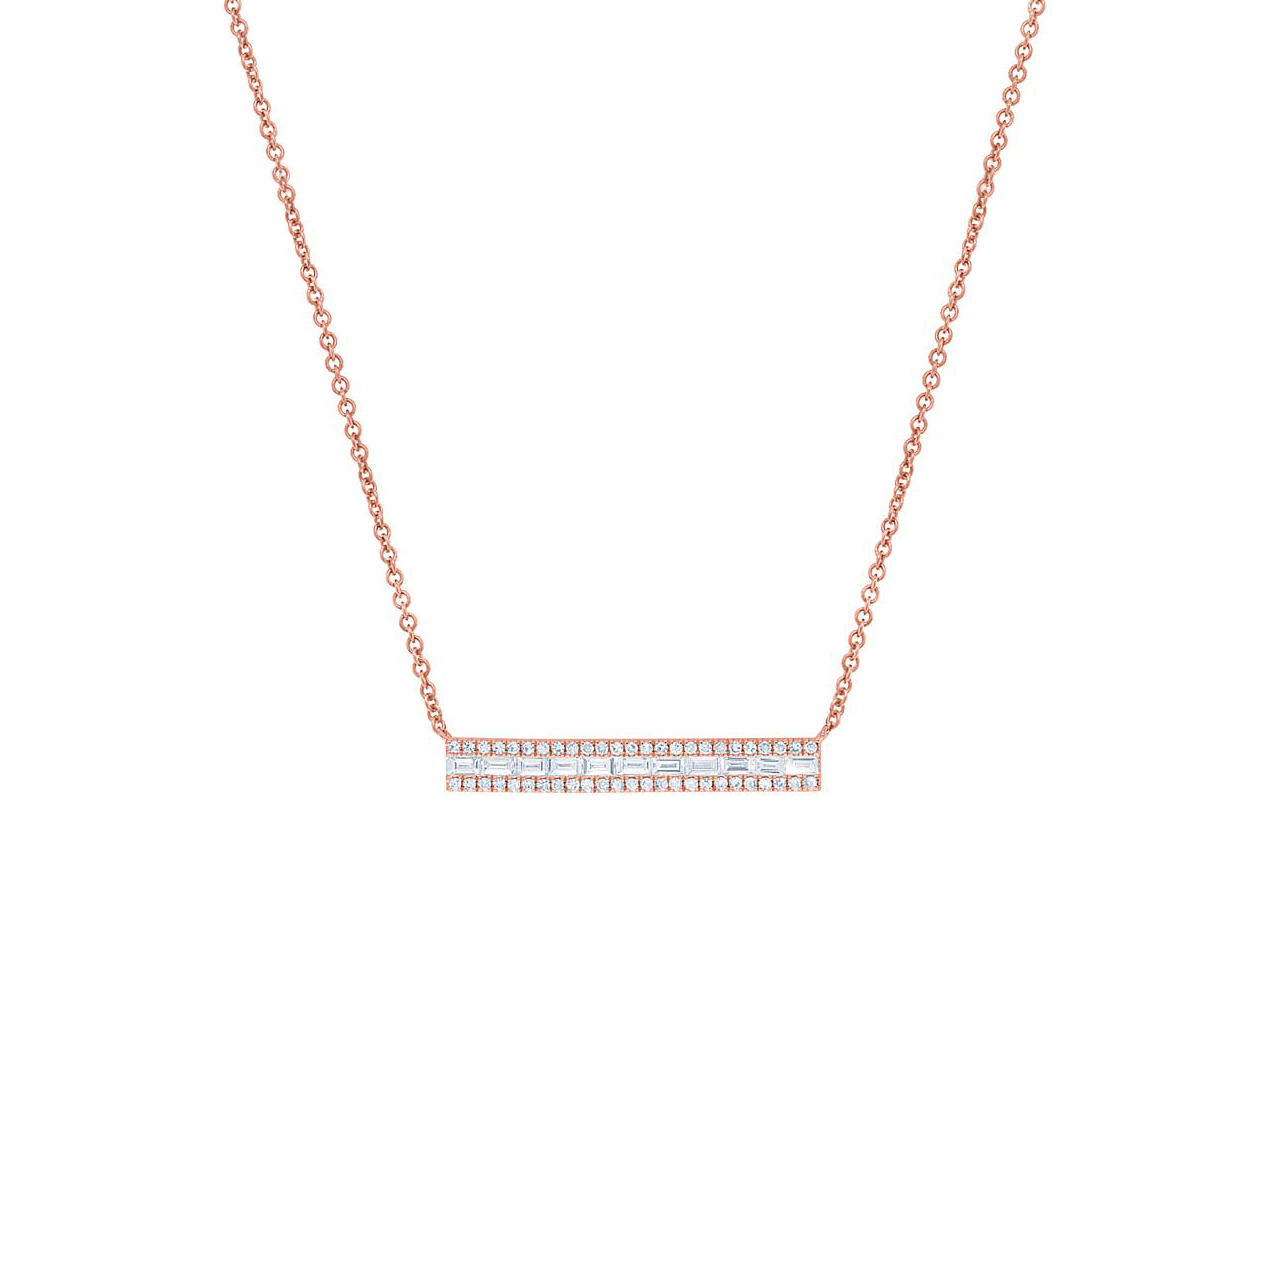 Minimalist bar necklace with baguette diamonds in rose gold.